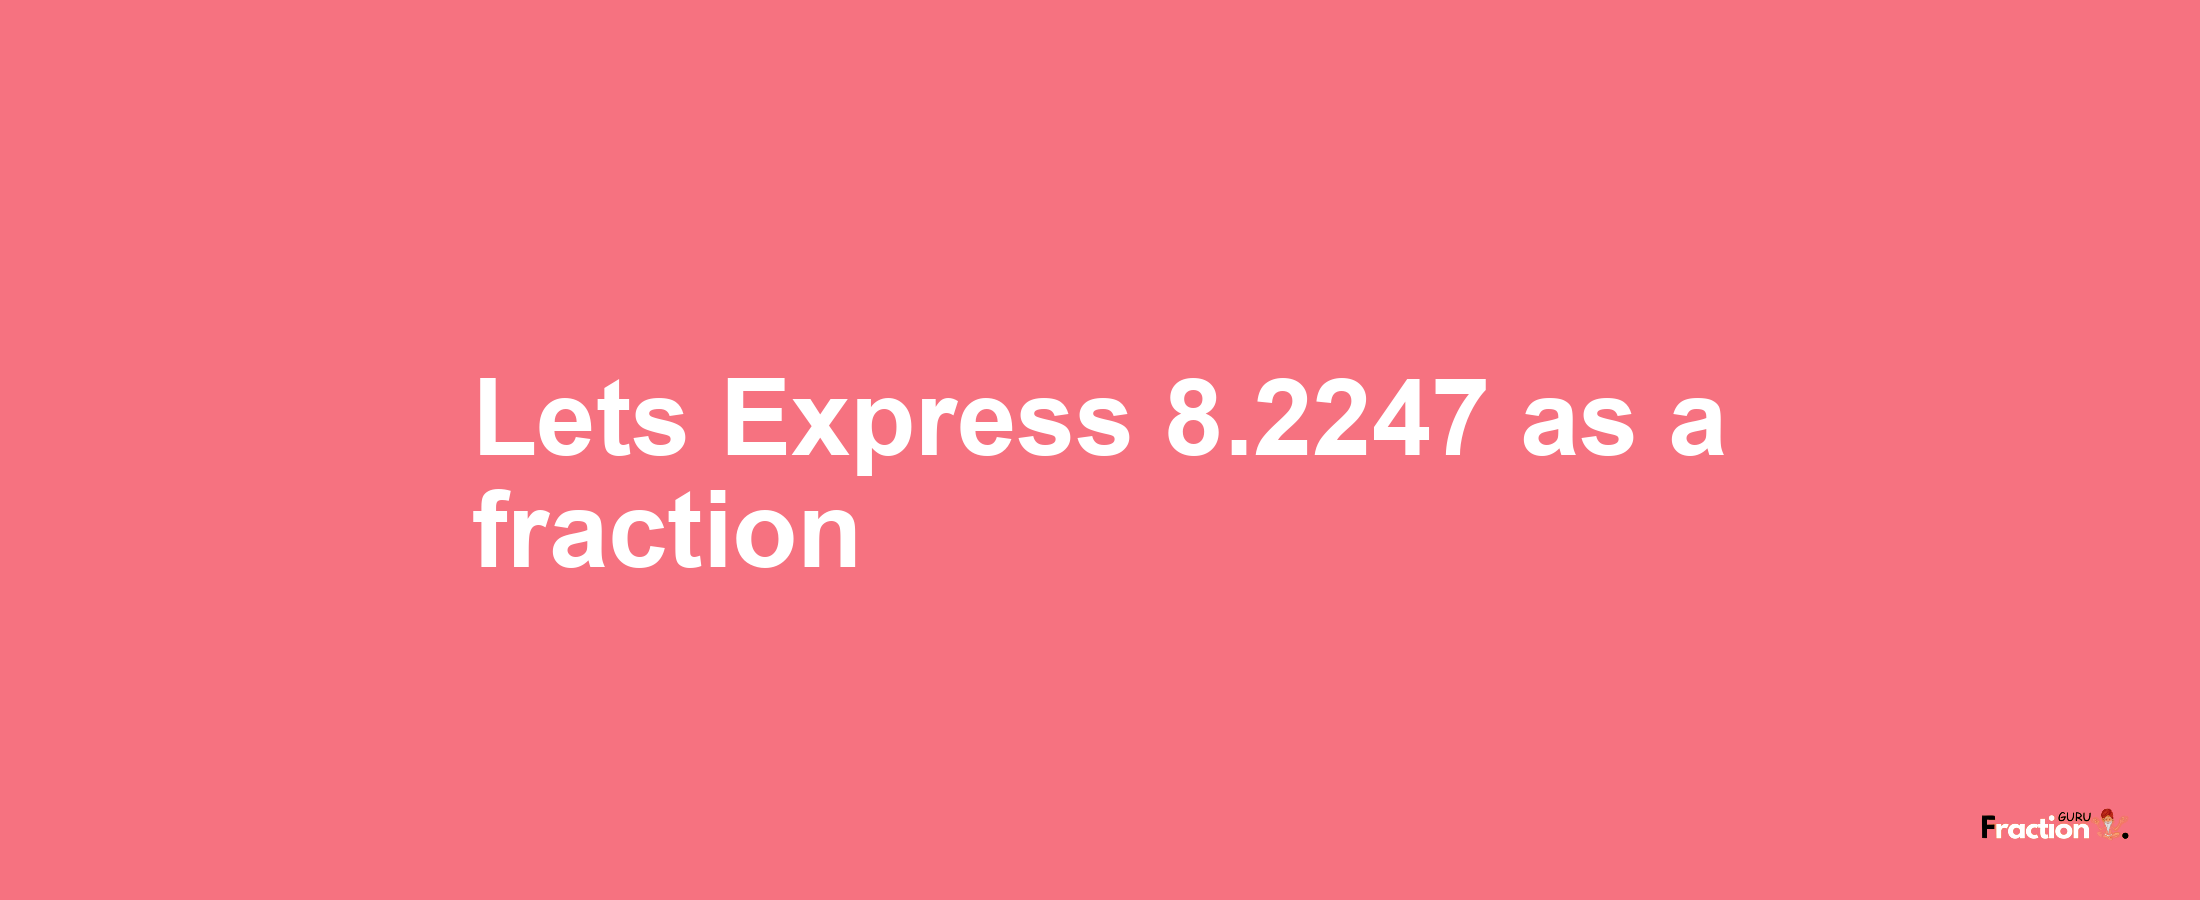 Lets Express 8.2247 as afraction